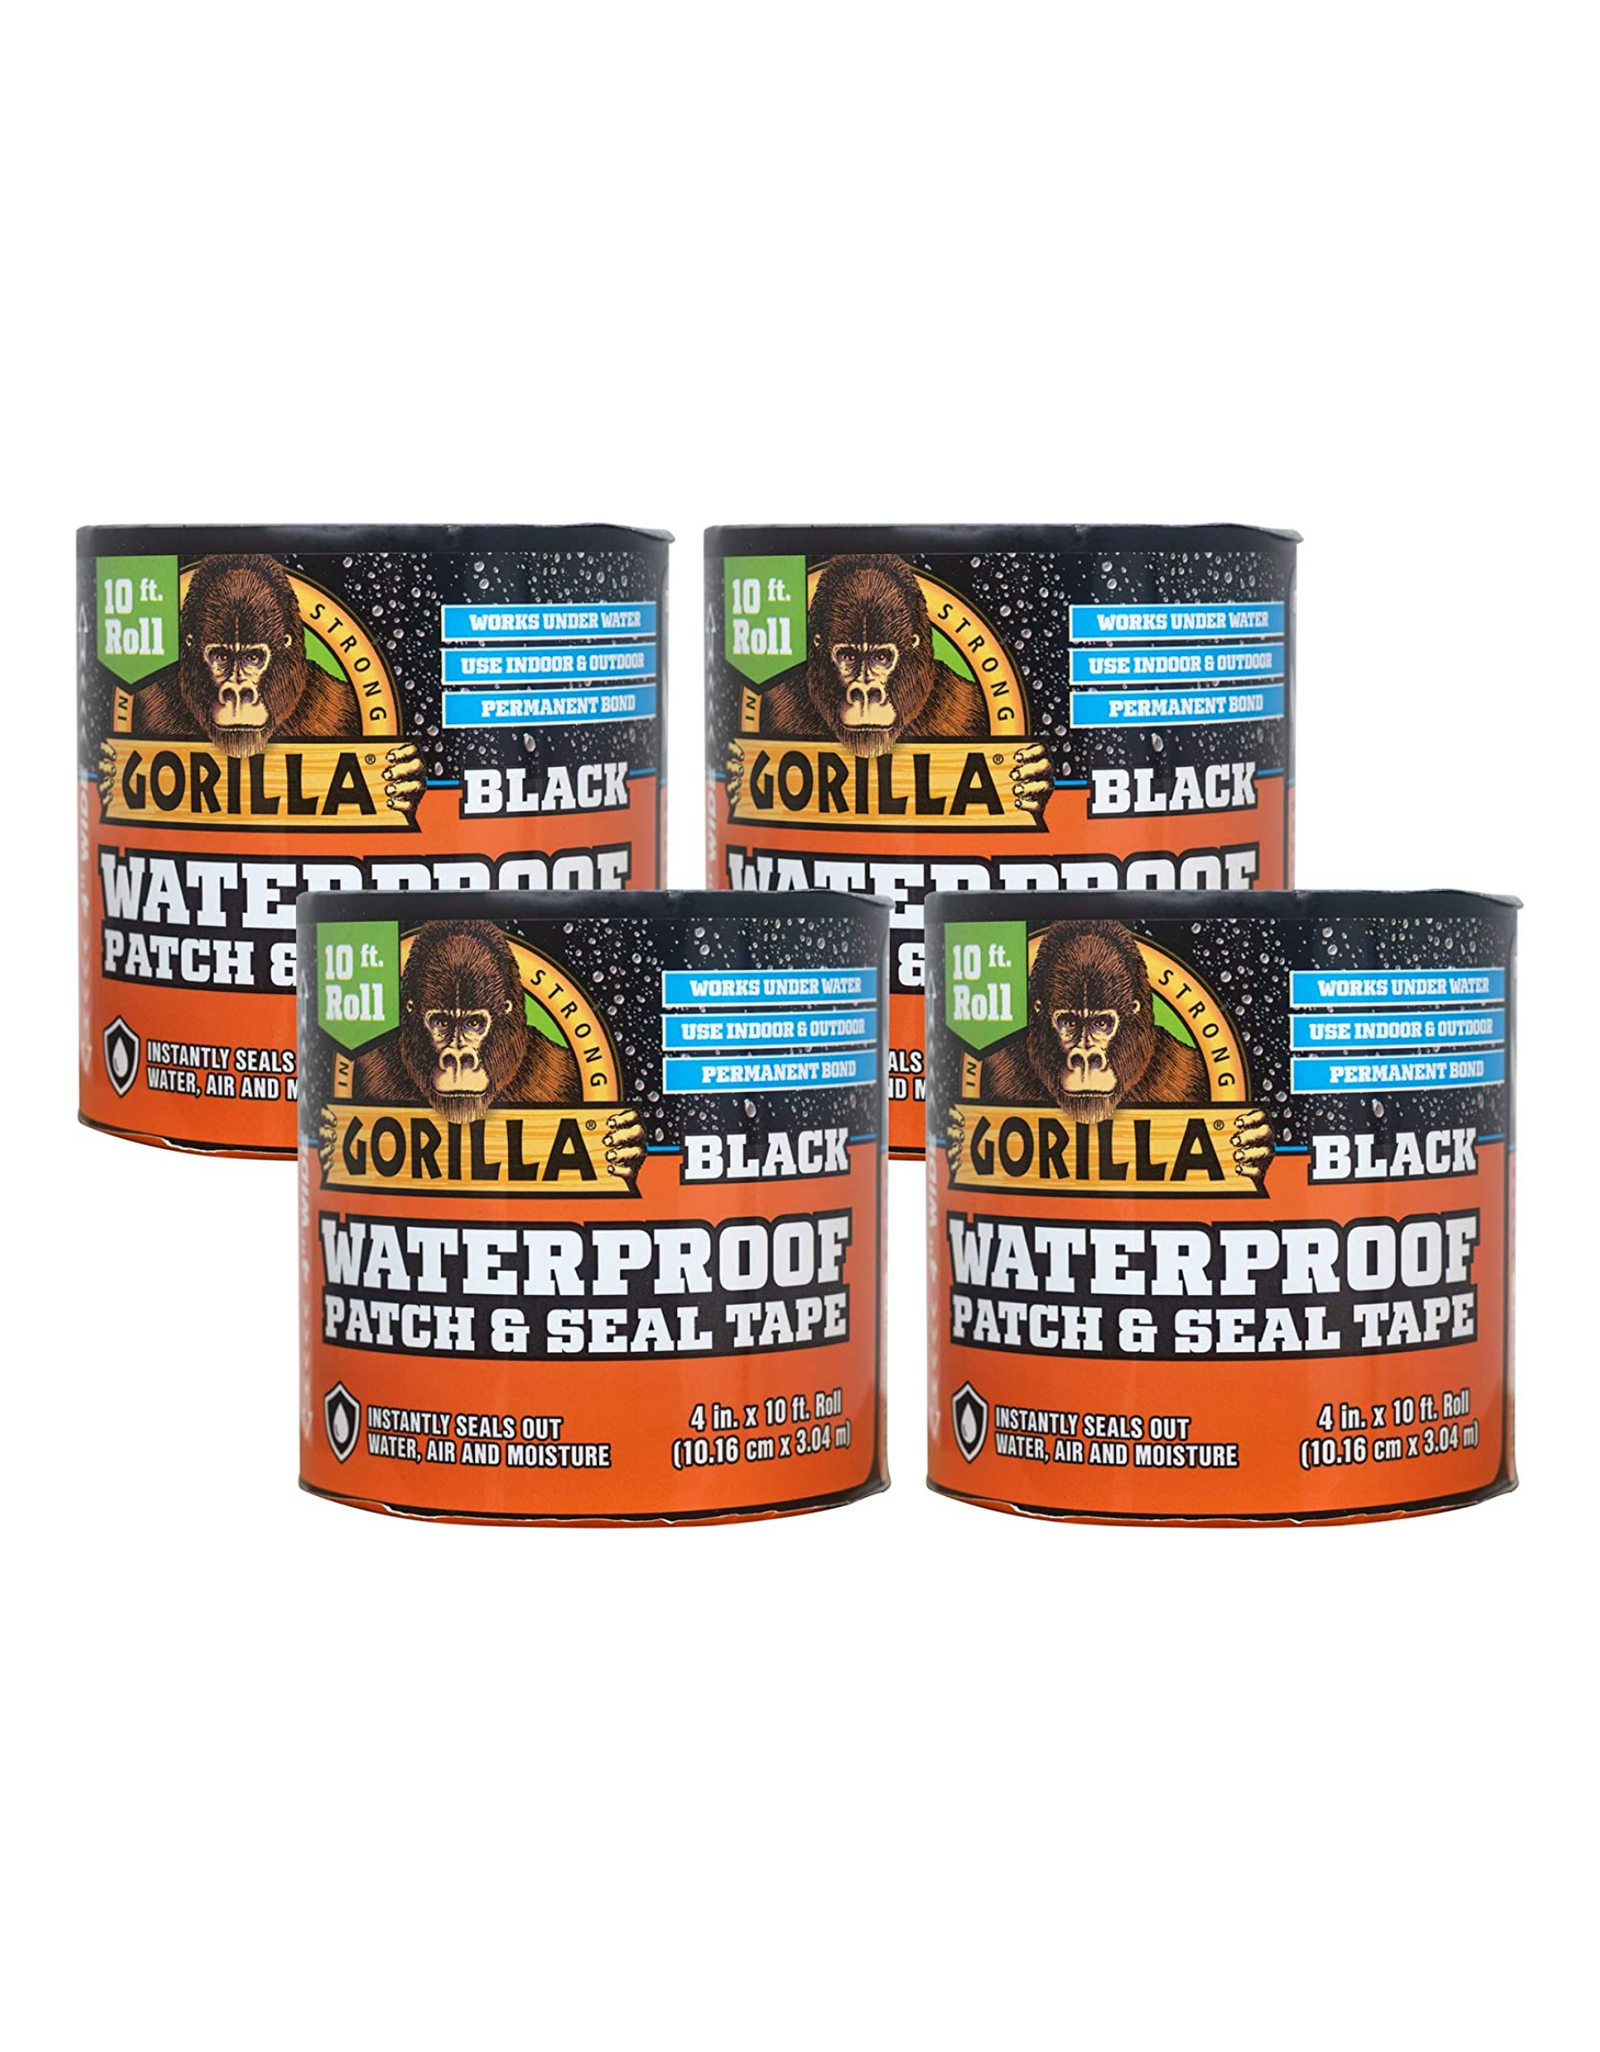 Gorilla Waterproof Patch & Seal Tape 4 Inch x 10 ft., Black, (Pack of 4)